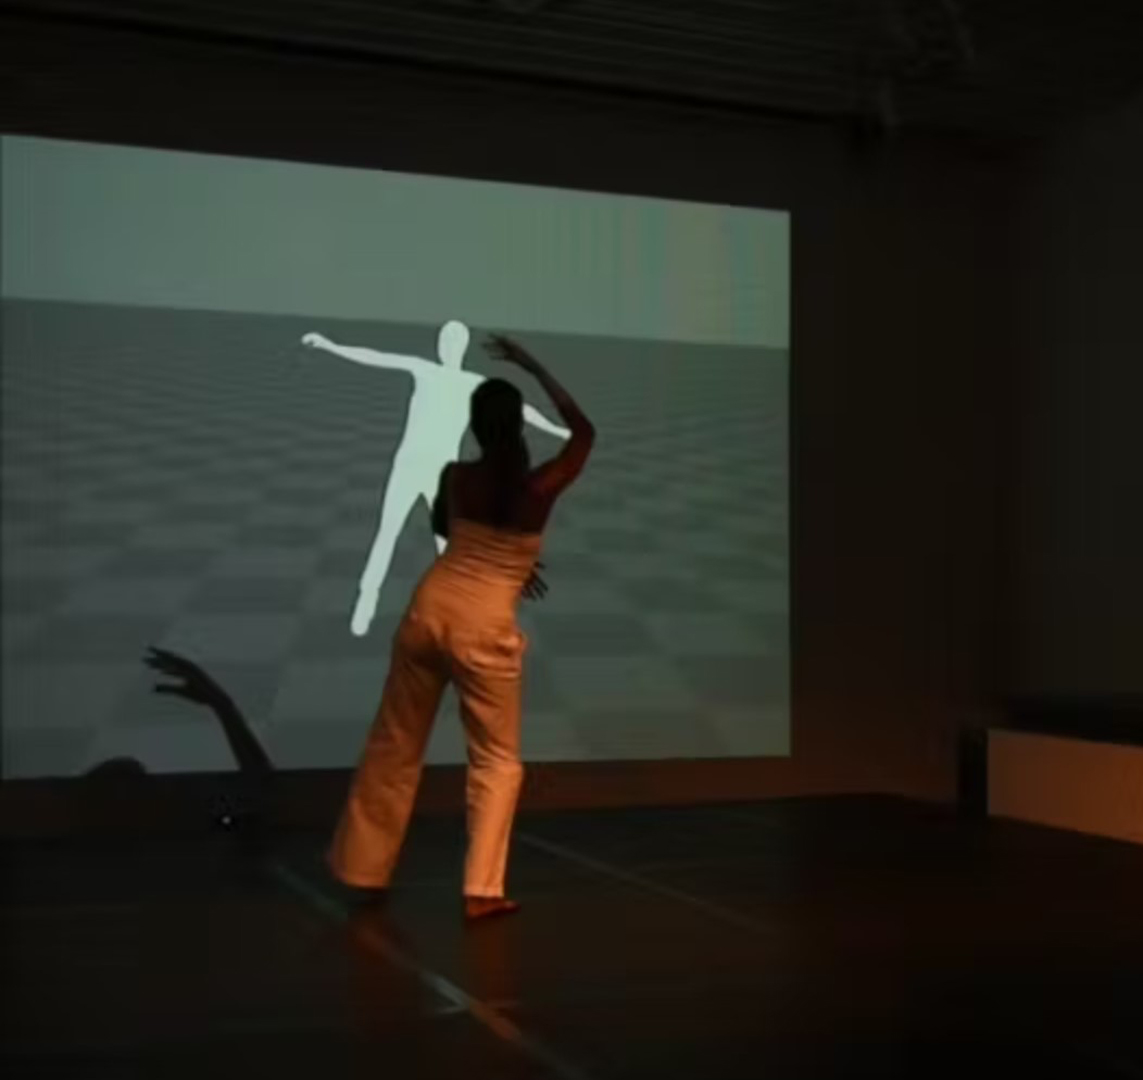 ©ISEA2015: 21st International Symposium on Electronic Art, Alexander Berman and Valencia James, Improvising virtual dancer meets audience: Observations from a user study